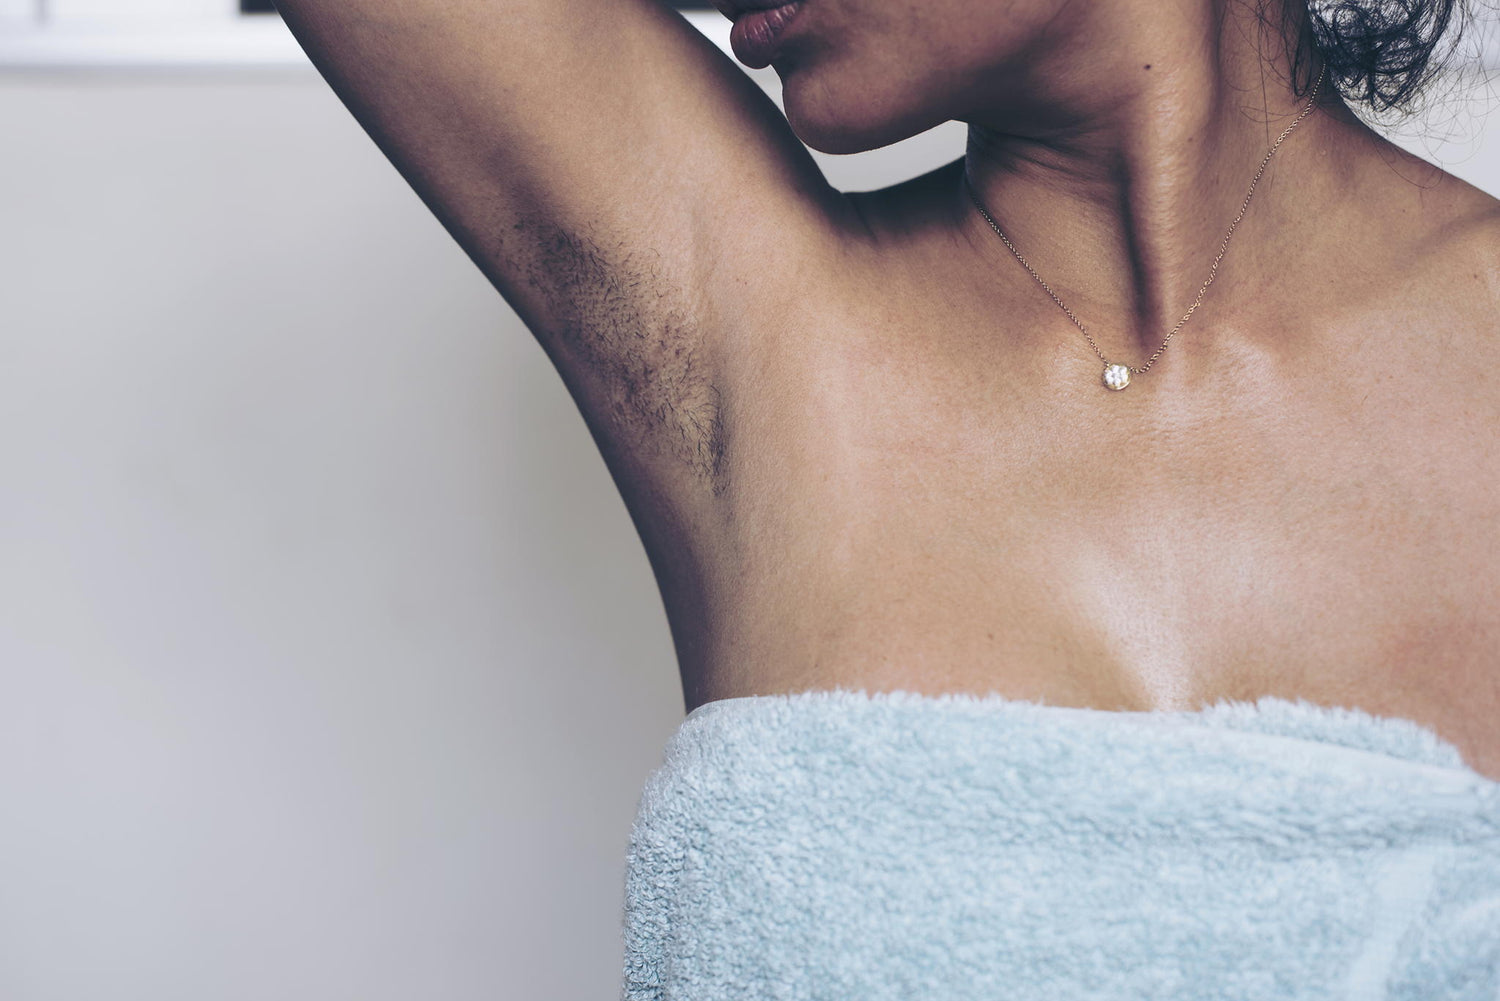 Shaving vs Waxing - Which is Best?